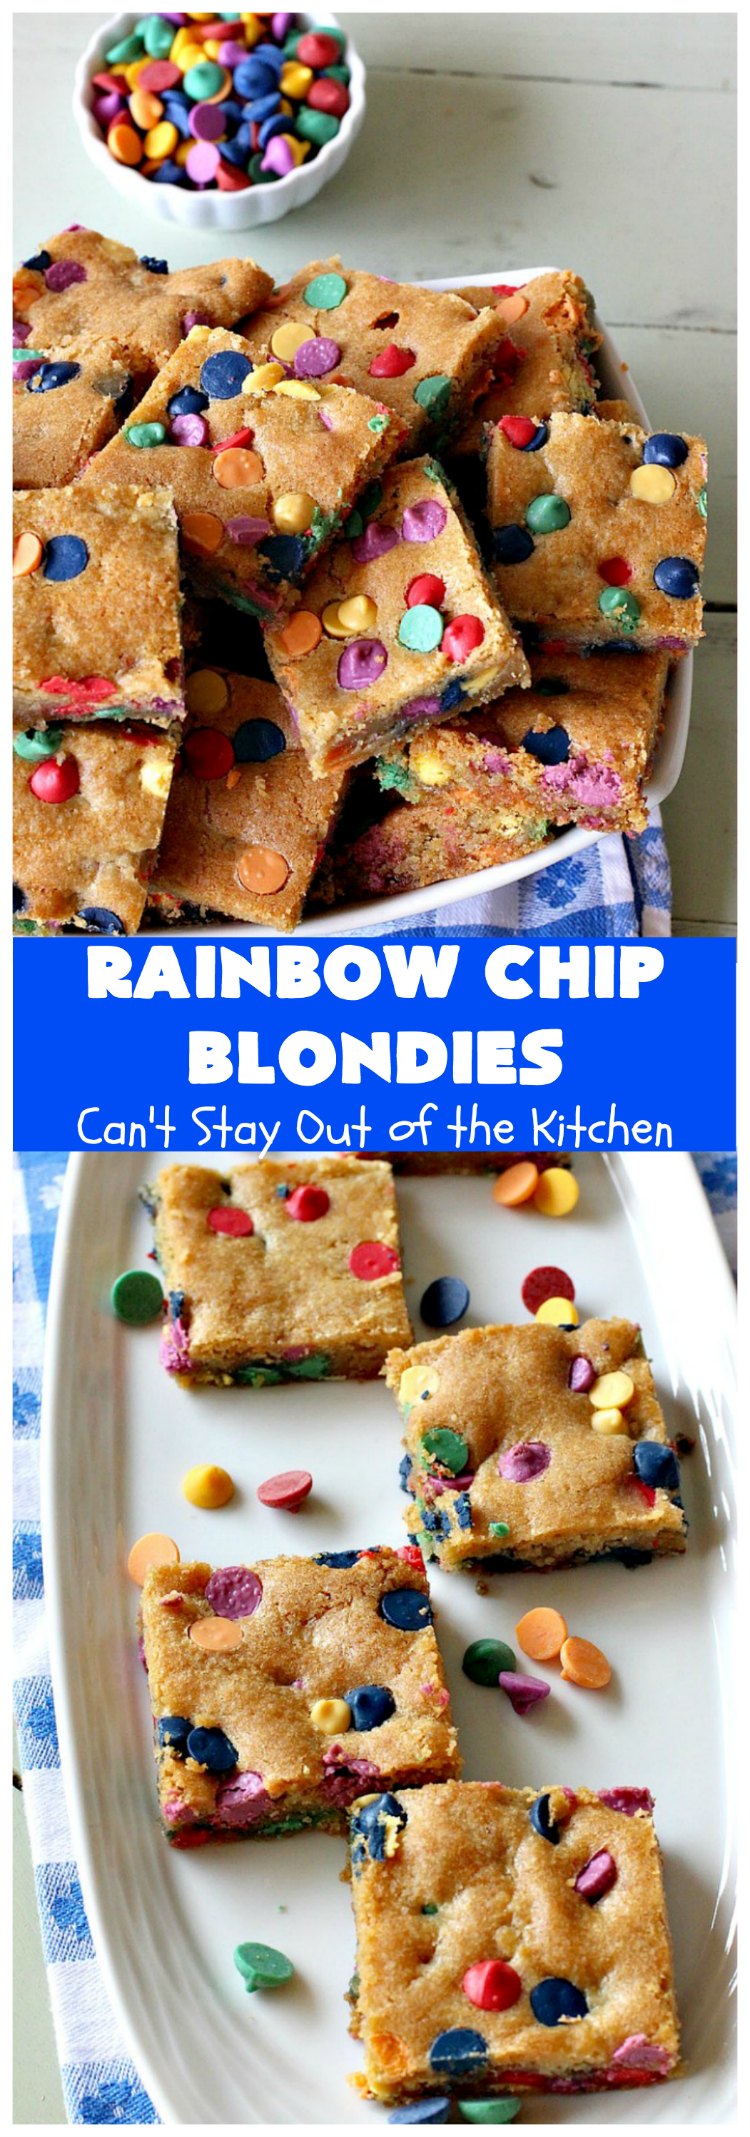 Rainbow Chip Blondies | Can't Stay Out of the Kitchen | these outrageous #brownies will knock your socks off. They're made with #RainbowChips so they're packed with color and flavor. Terrific for #tailgating parties, potlucks & backyard BBQs. #ChristmasCookieExchange #dessert #cookie #holiday #HolidayDessert #BirthdayDessert #RainbowChipBlondies